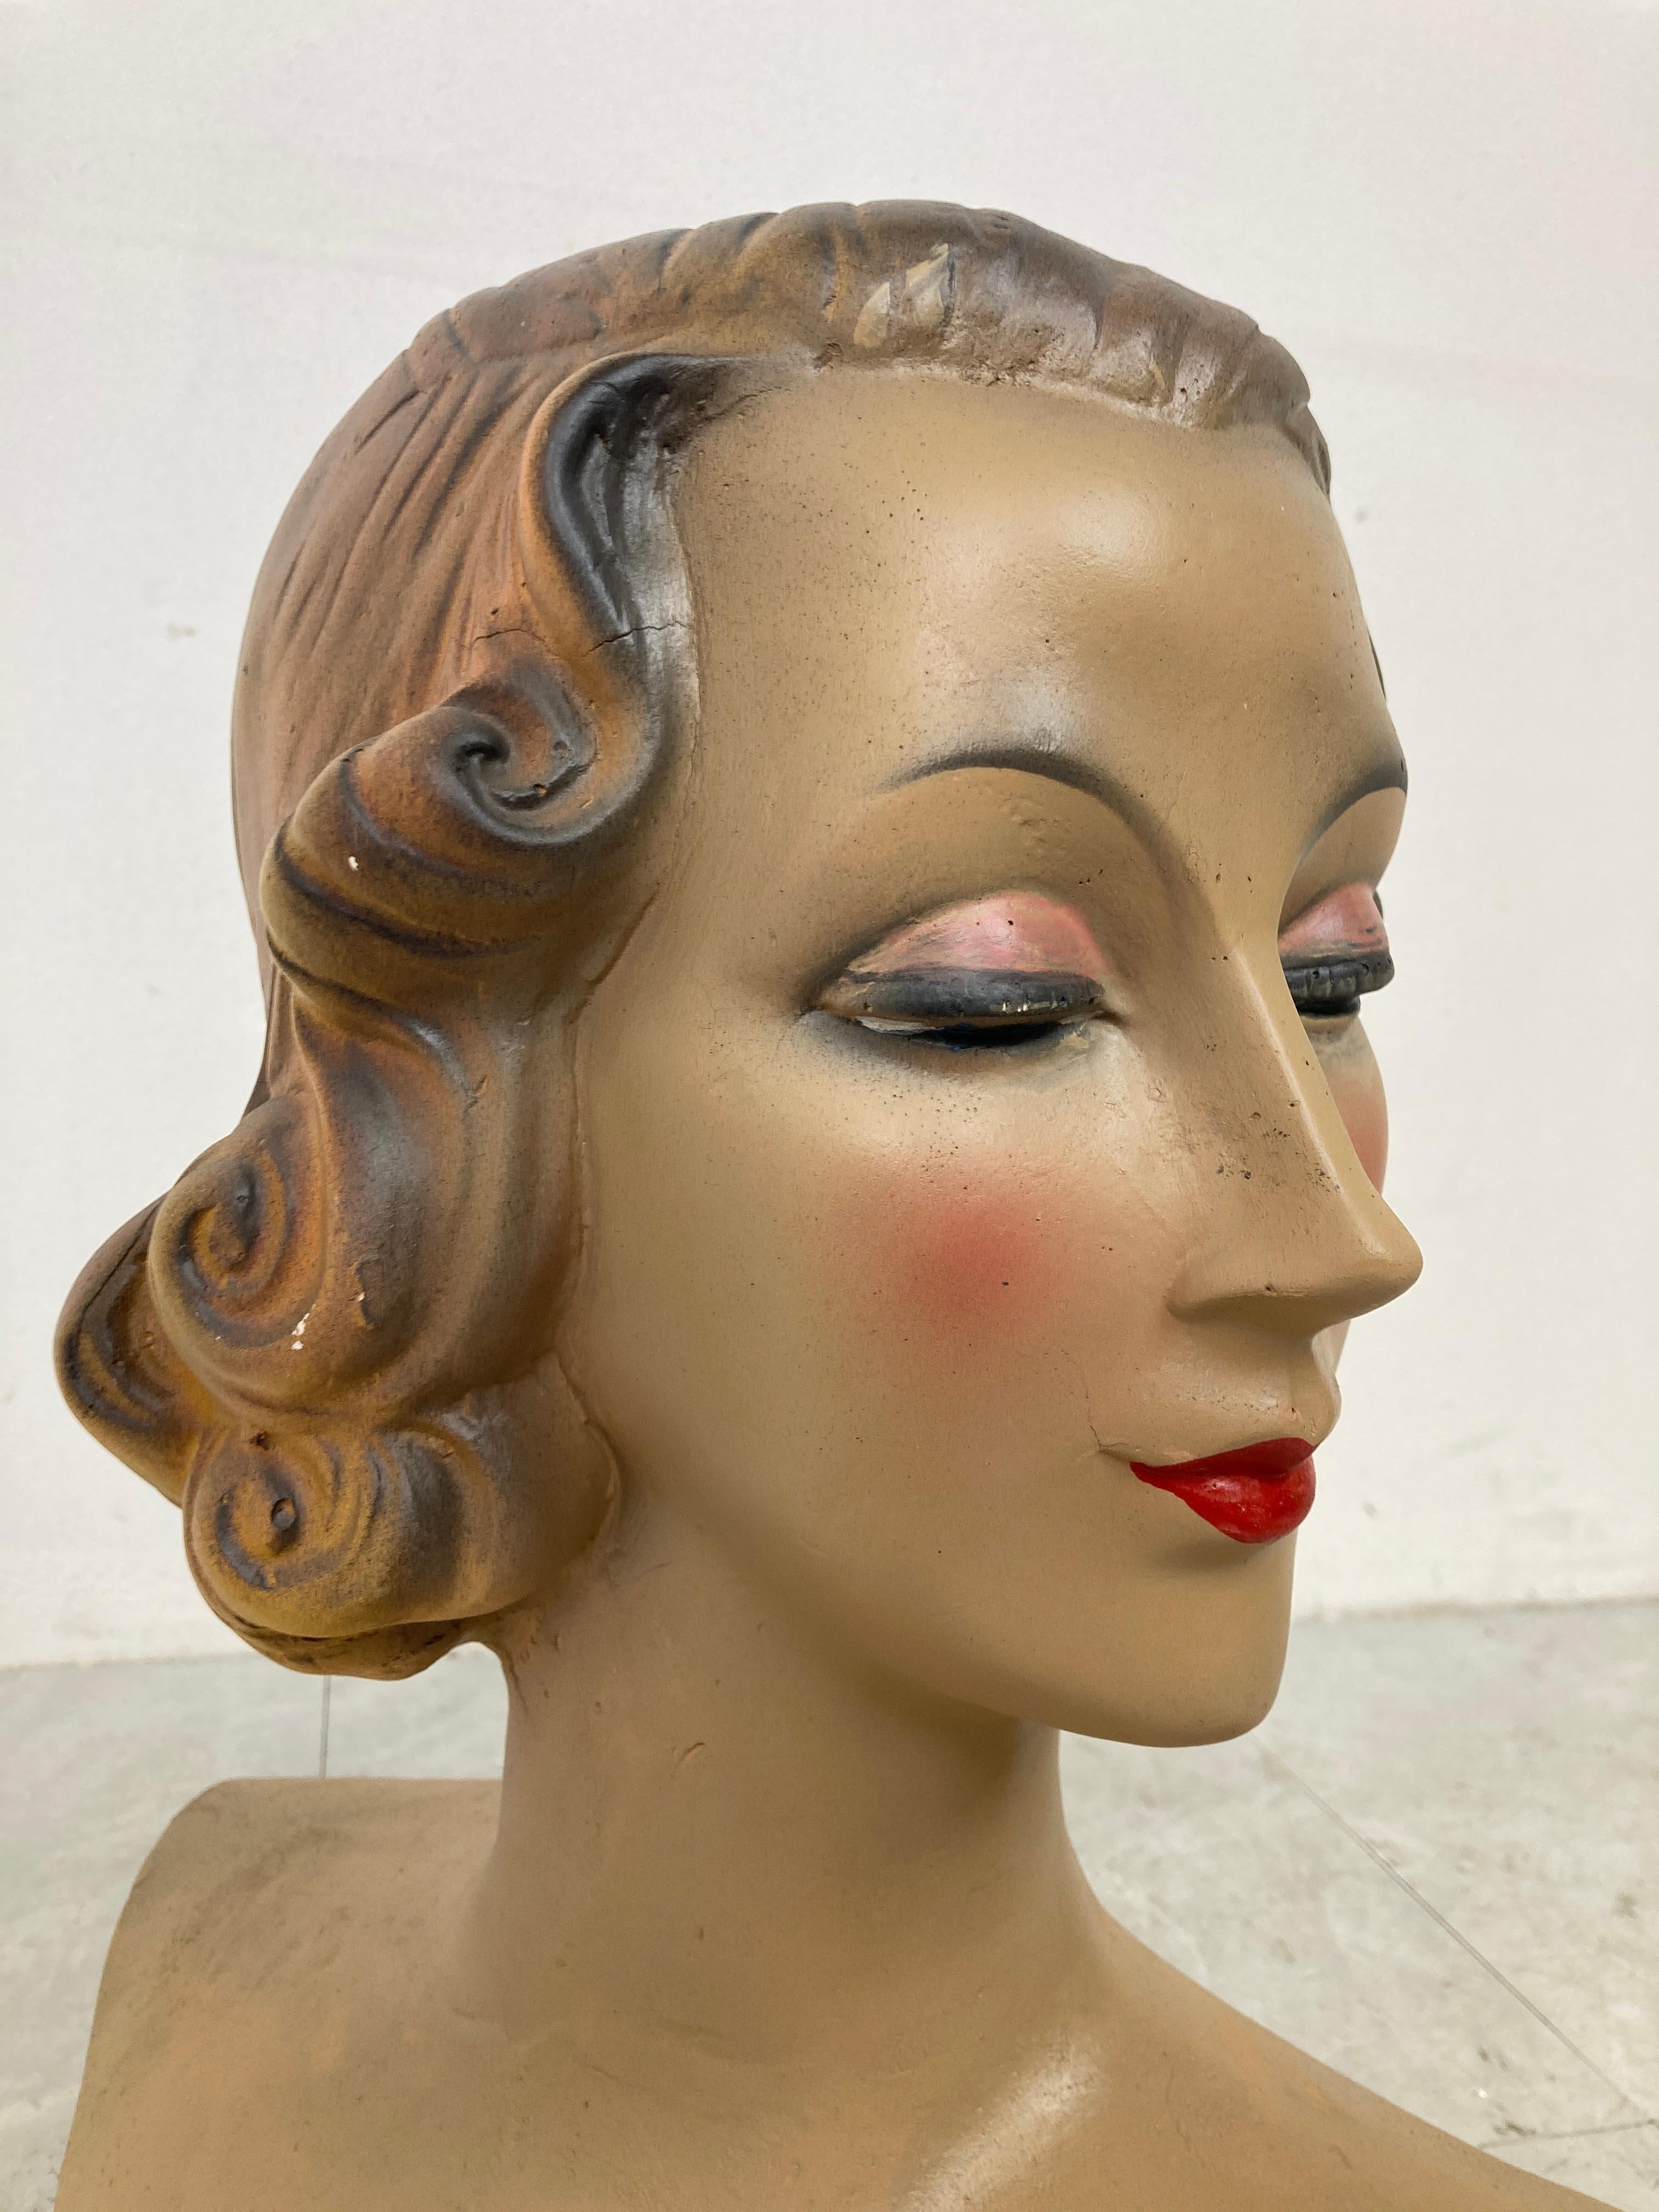 Beautiful female mannequin head made from plaster servings as an advertising bust in a shop.

It was used to be displayed at a shopcounter or vitrine.

Comes from a lot acquired from a clothes shop that stopped activities.

Great decorative